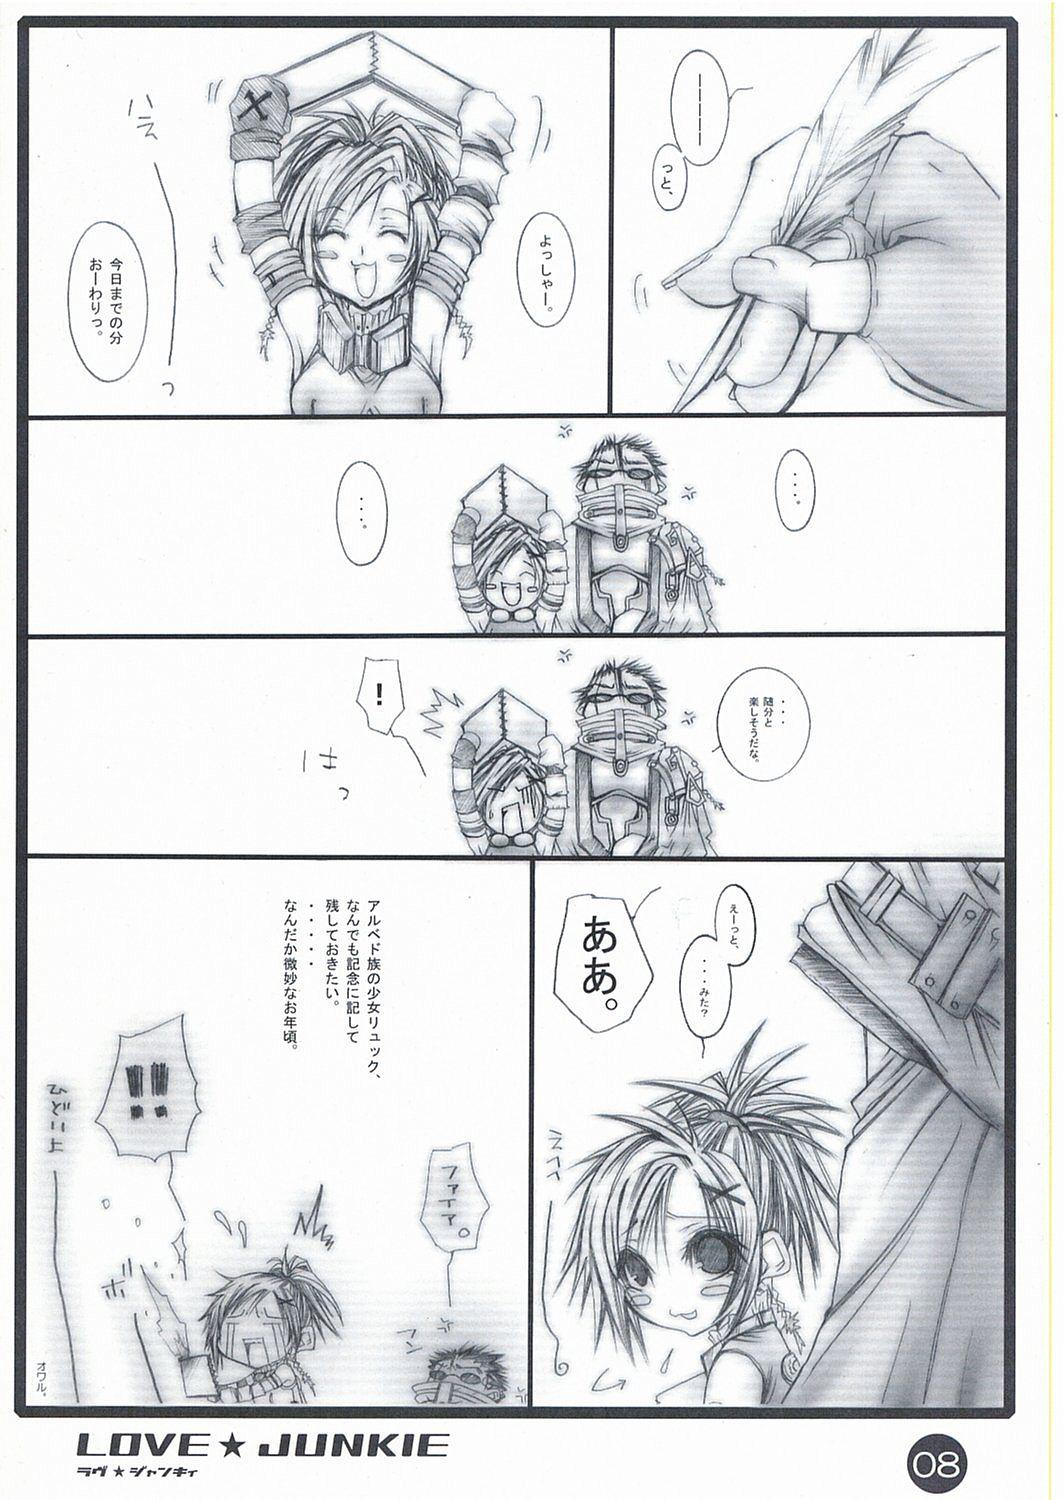 Old And Young LOVE JUNKIE - Final fantasy x Small - Page 7